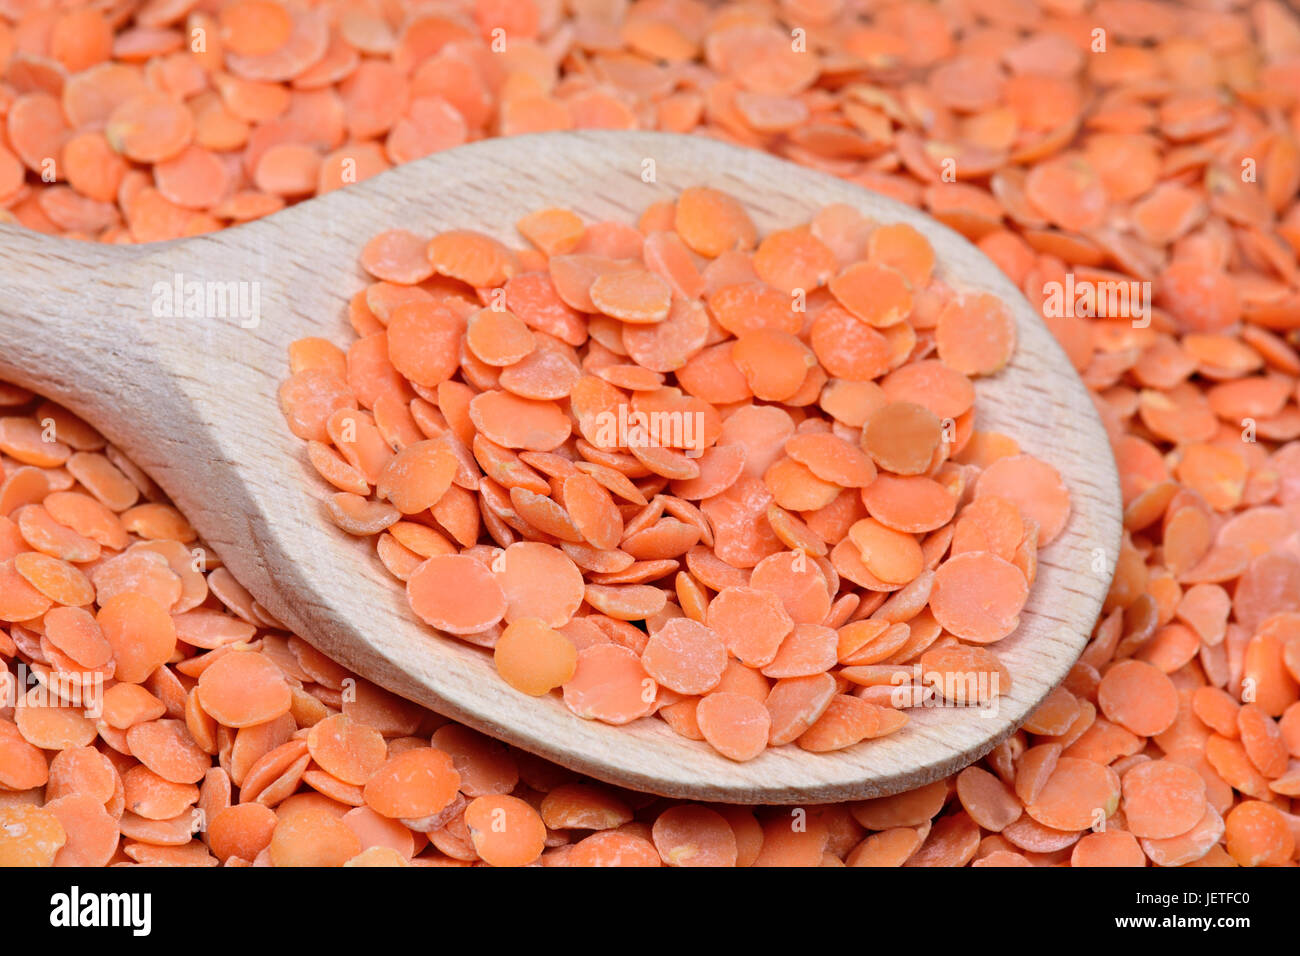 Many red lentils in a wooden spoon close-up Stock Photo